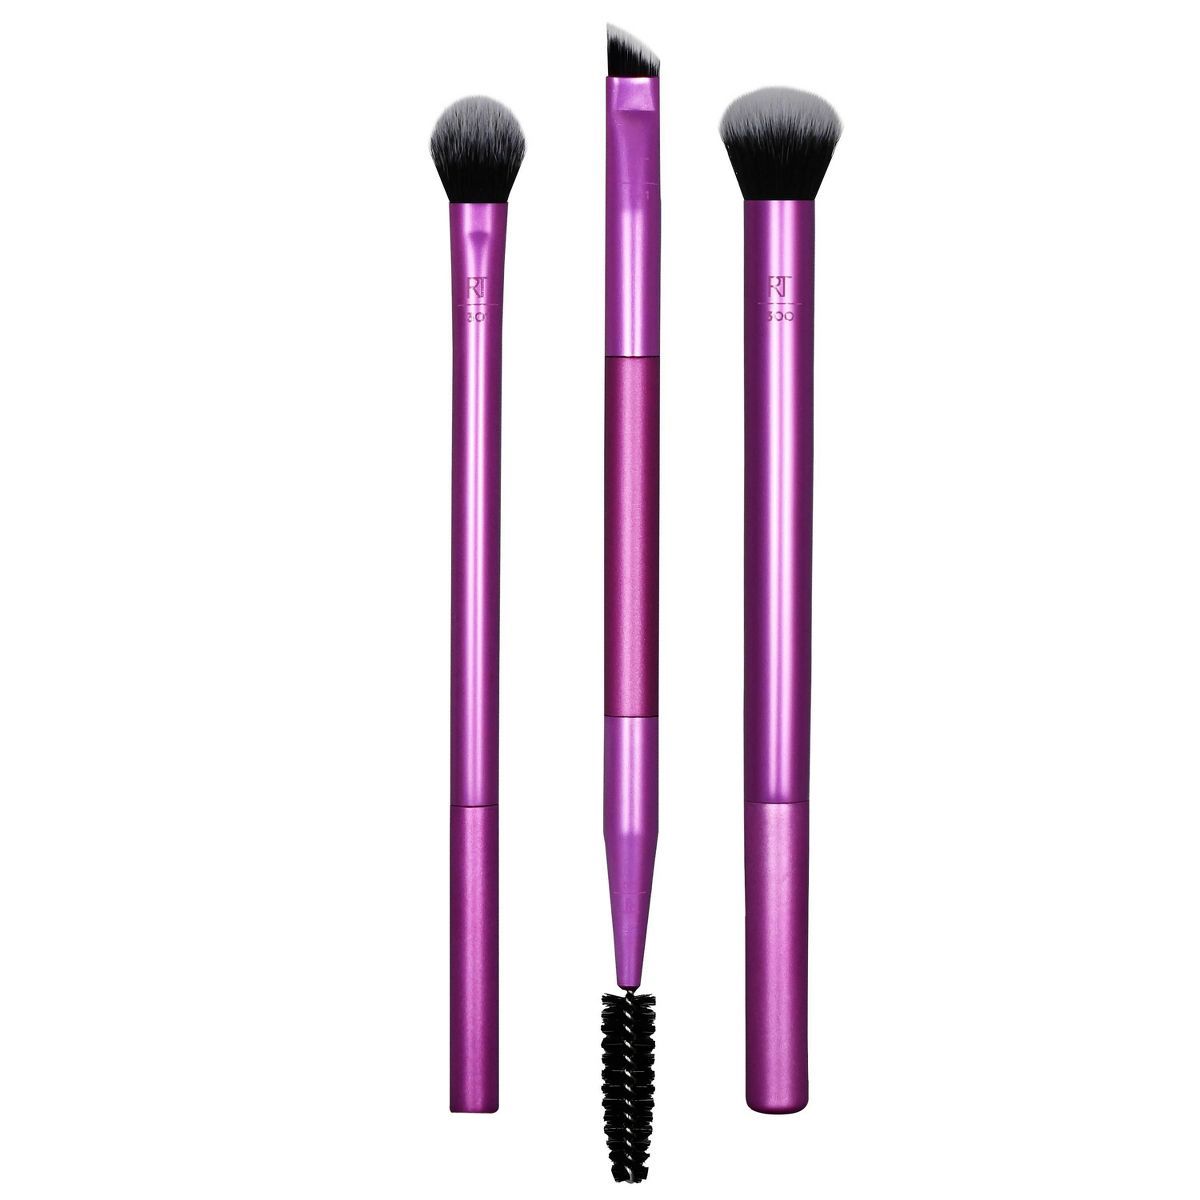 Real Techniques Eye Shade + Blend Makeup Brush Trio - 3 ct | Target